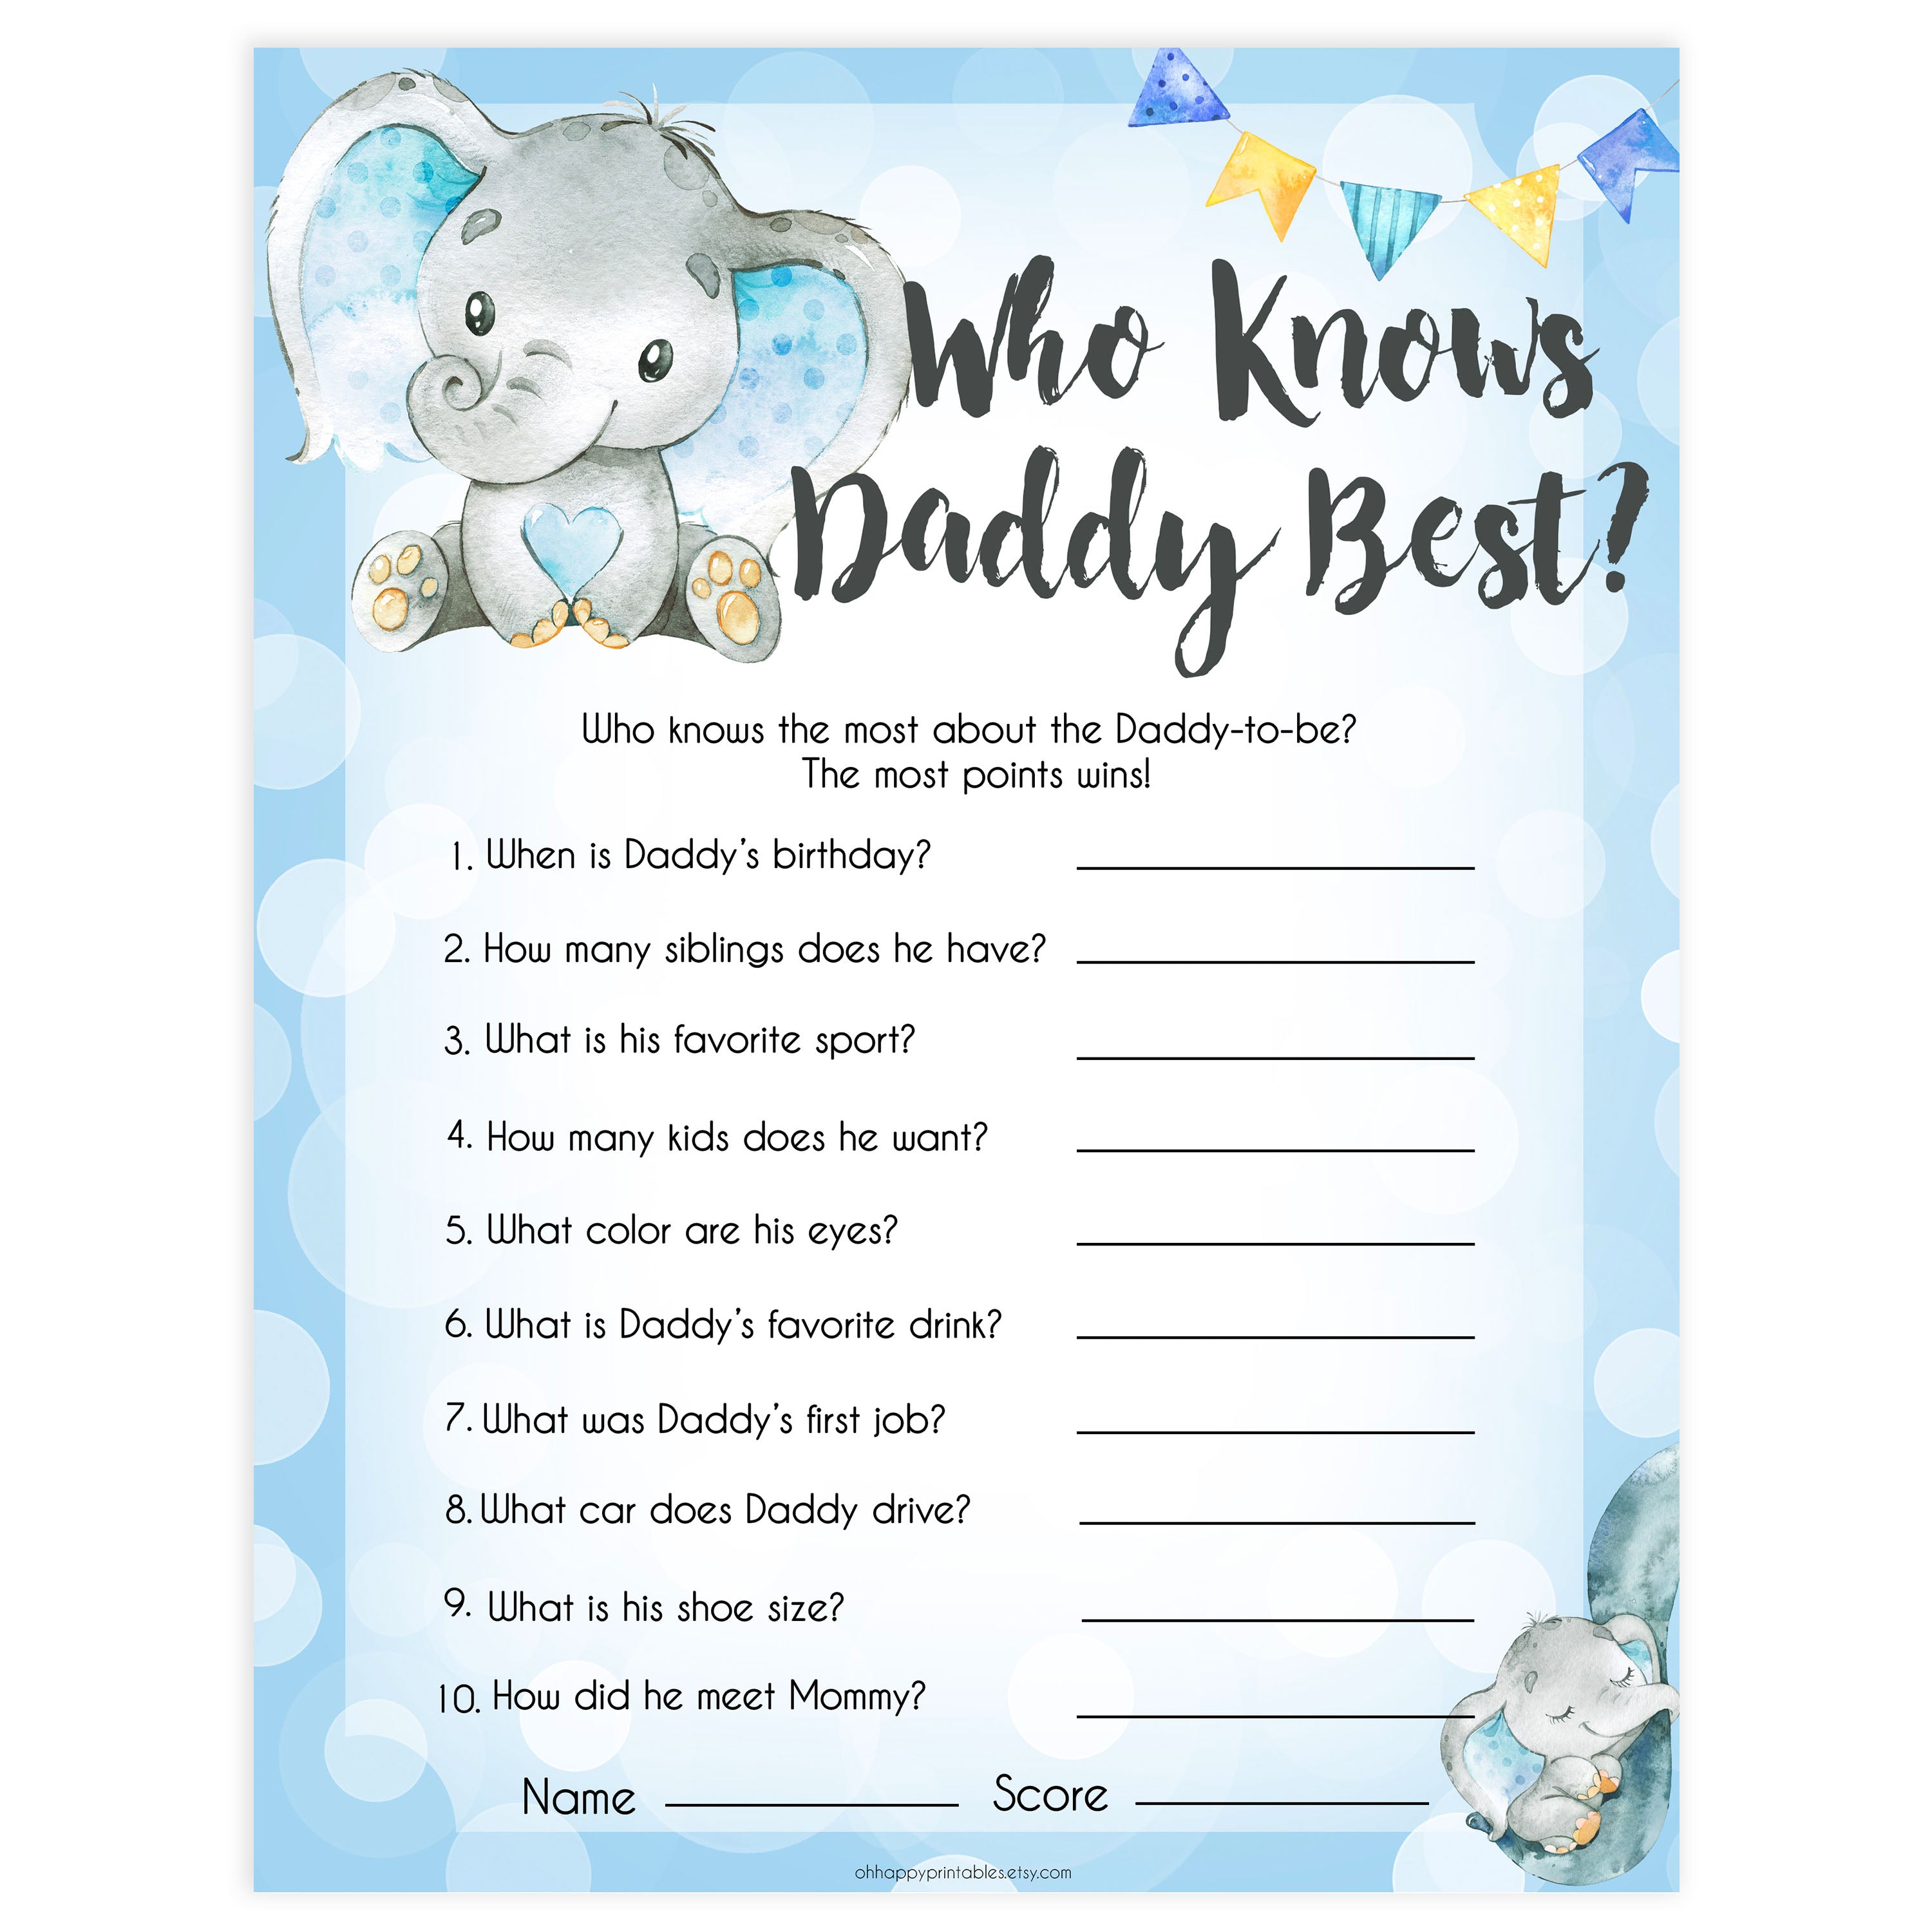 Blue elephant baby games, who knows daddy best, elephant baby games, printable baby games, top baby games, best baby shower games, baby shower ideas, fun baby games, elephant baby shower